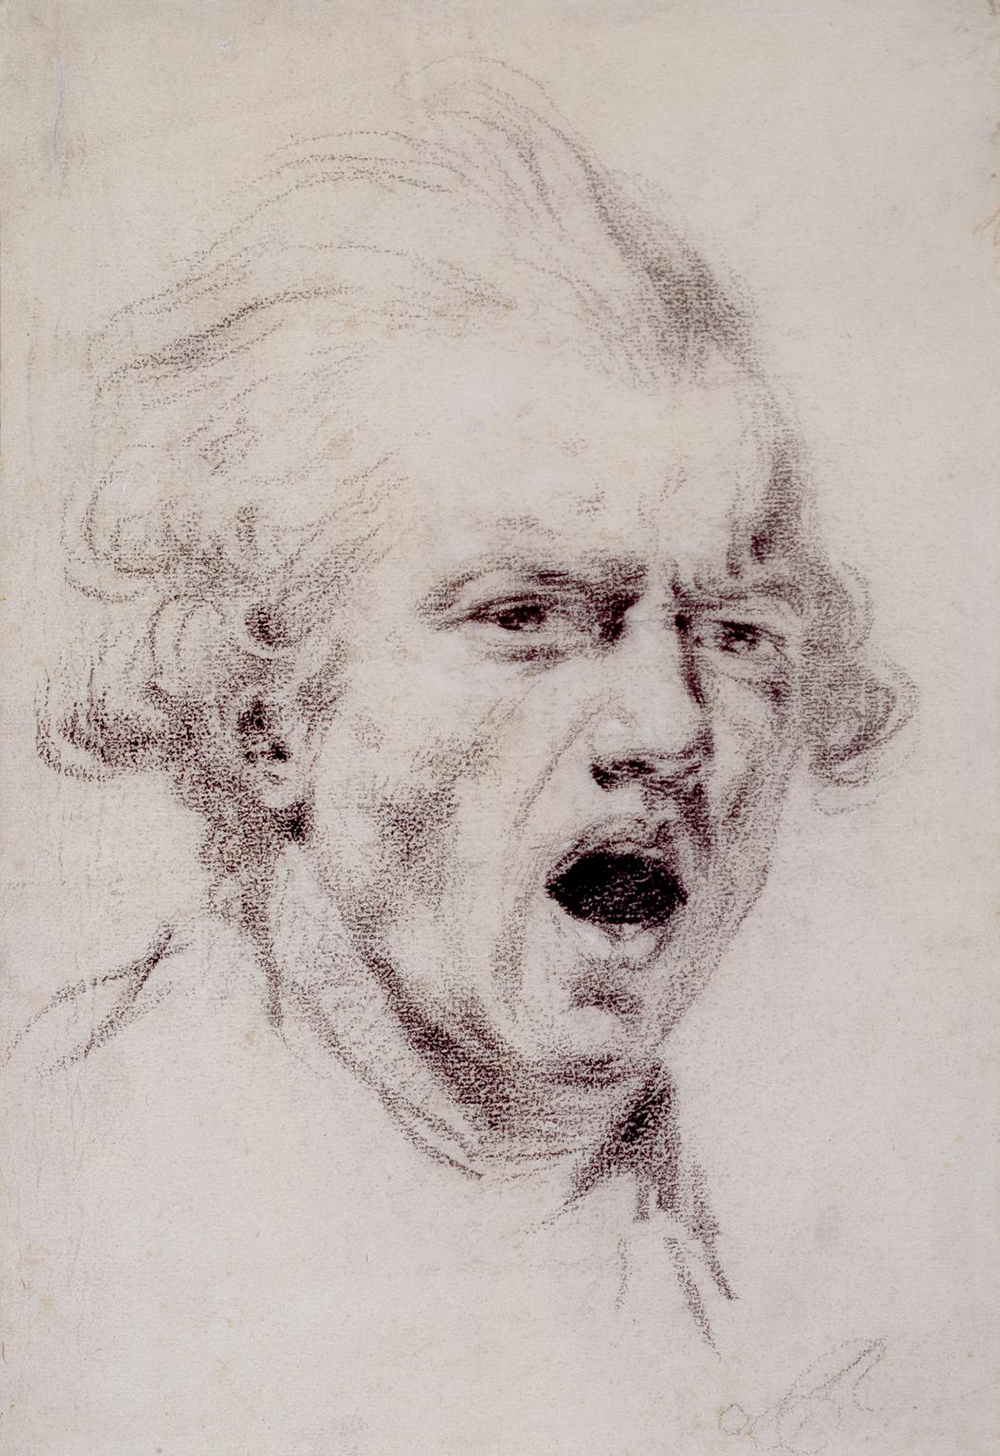 Chalk drawing of the head of a man with his mouth open and brow furrowed